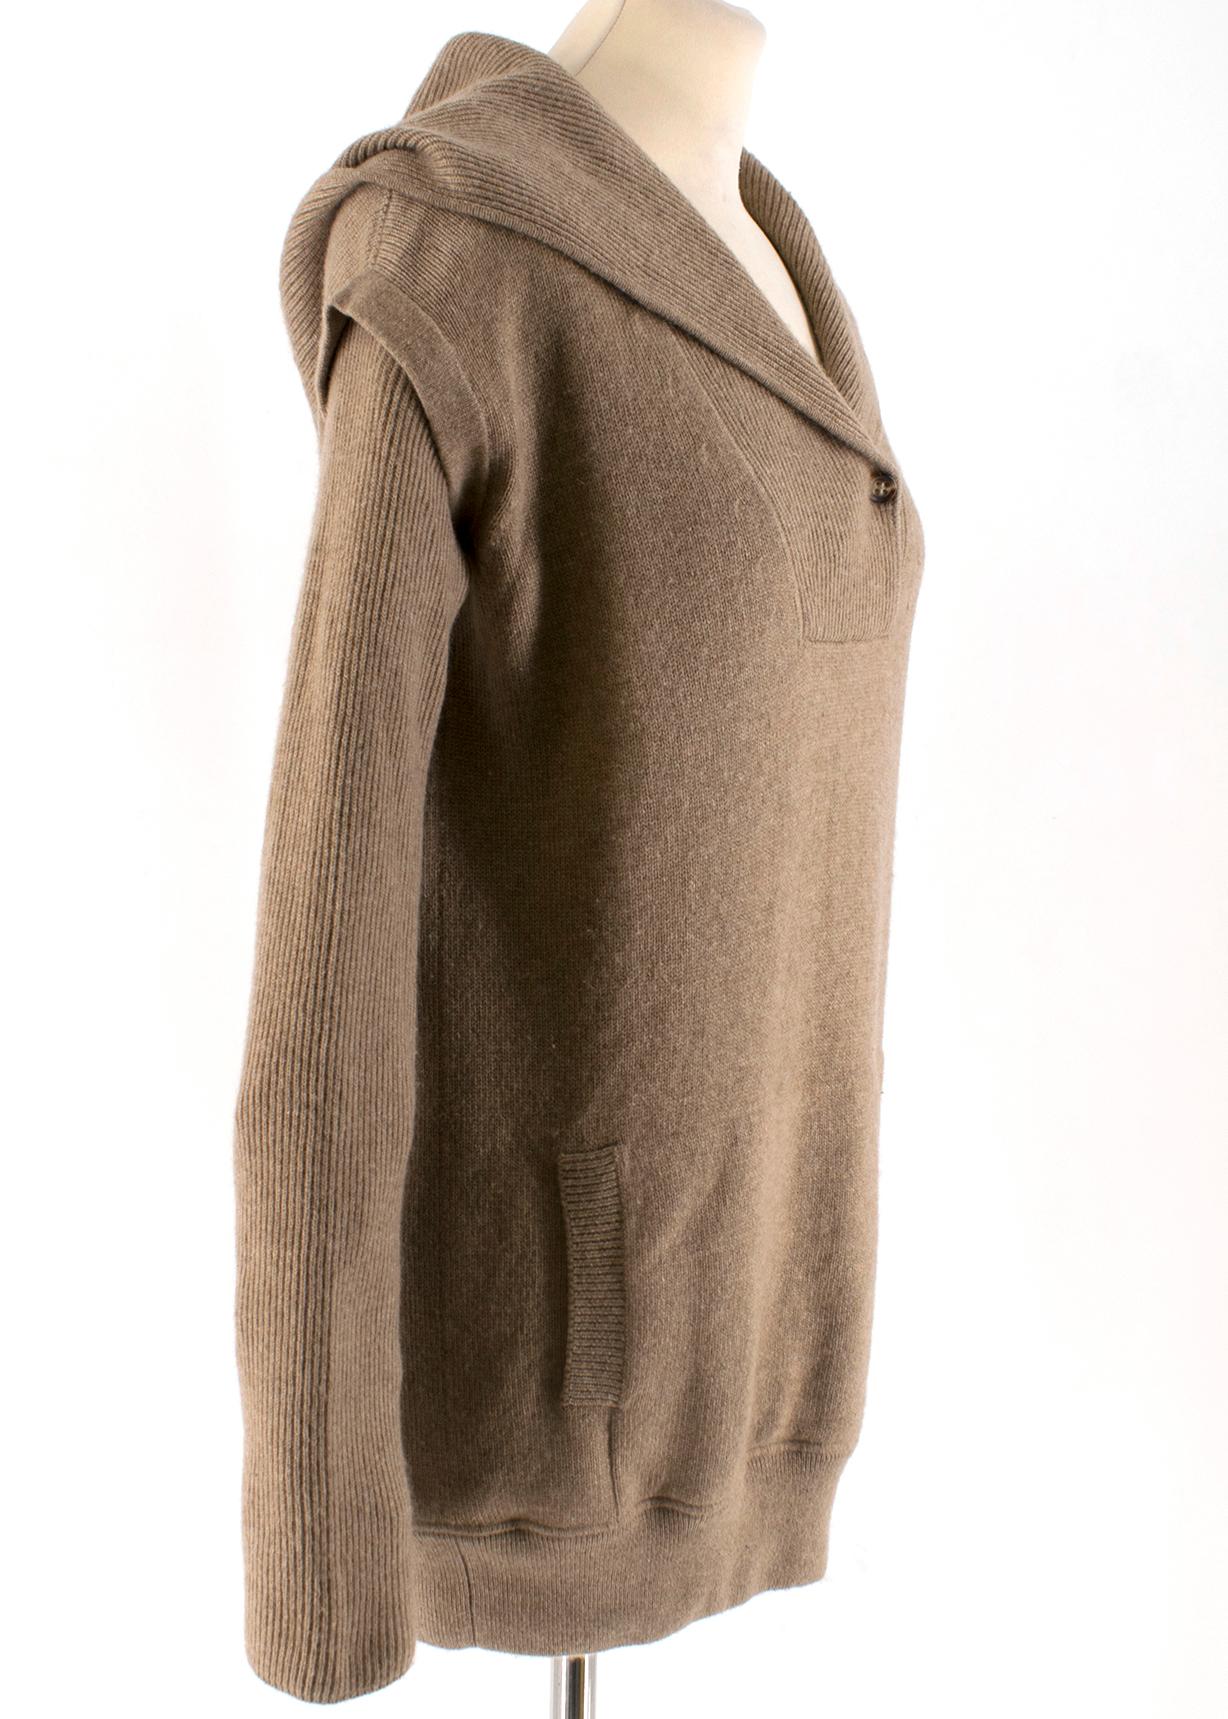 Super soft beige cashmere hoodie from Loro Piana. 

-  Made in Italy
- Silver Loro Piana logo
- Front pocket
- 100% Cashmere

Please note, these items are pre-owned and may show signs of being stored even when unworn and unused. This is reflected